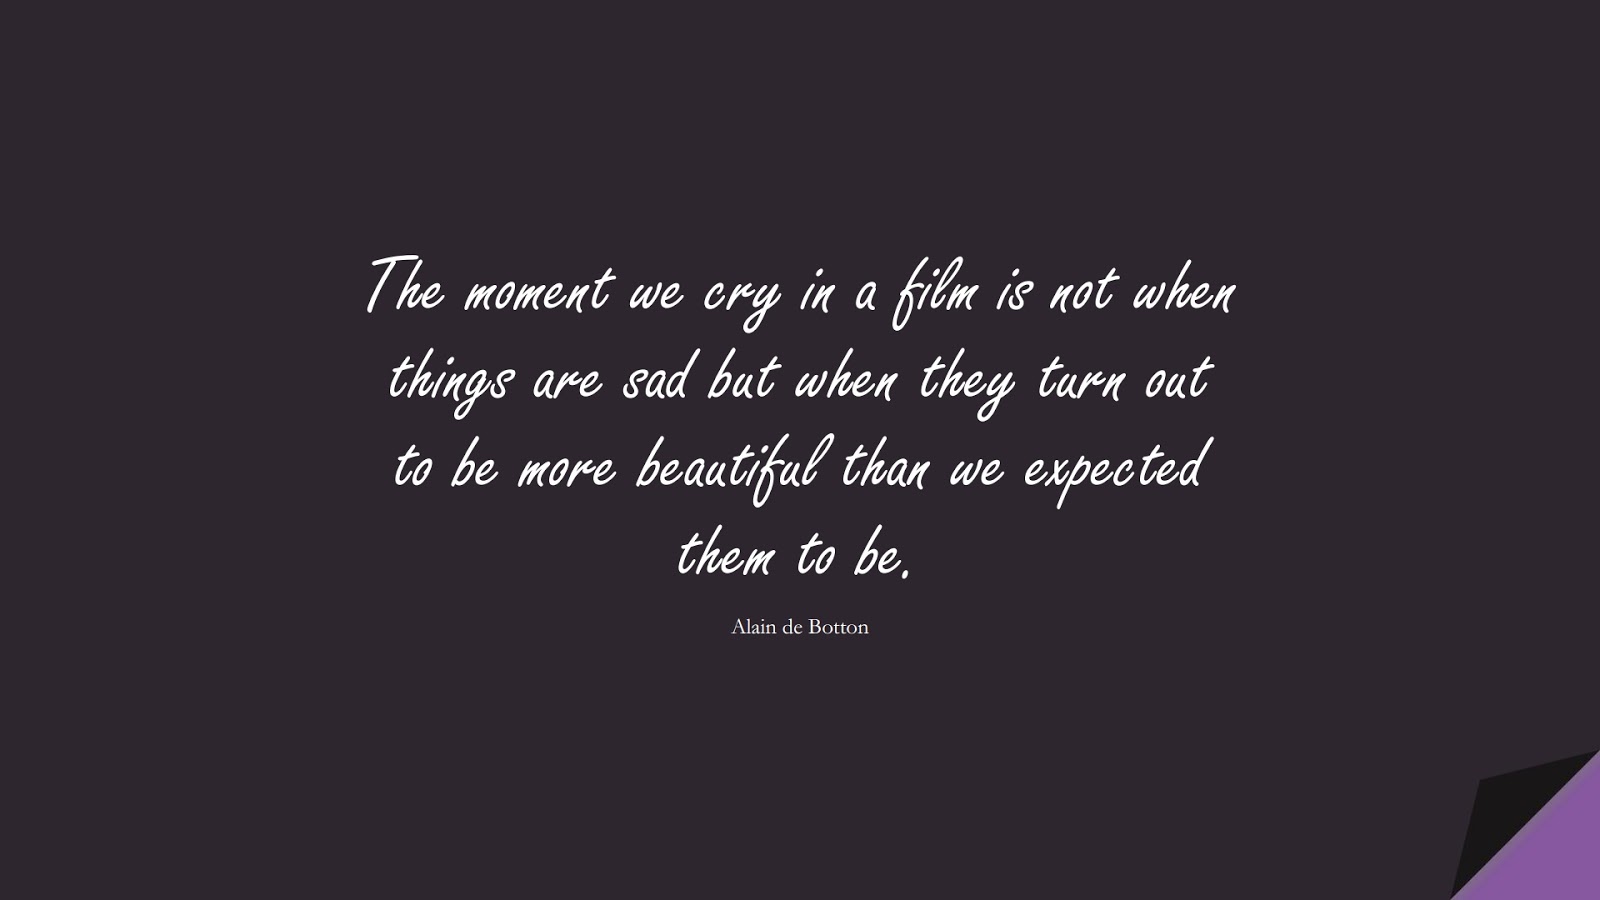 The moment we cry in a film is not when things are sad but when they turn out to be more beautiful than we expected them to be. (Alain de Botton);  #HumanityQuotes